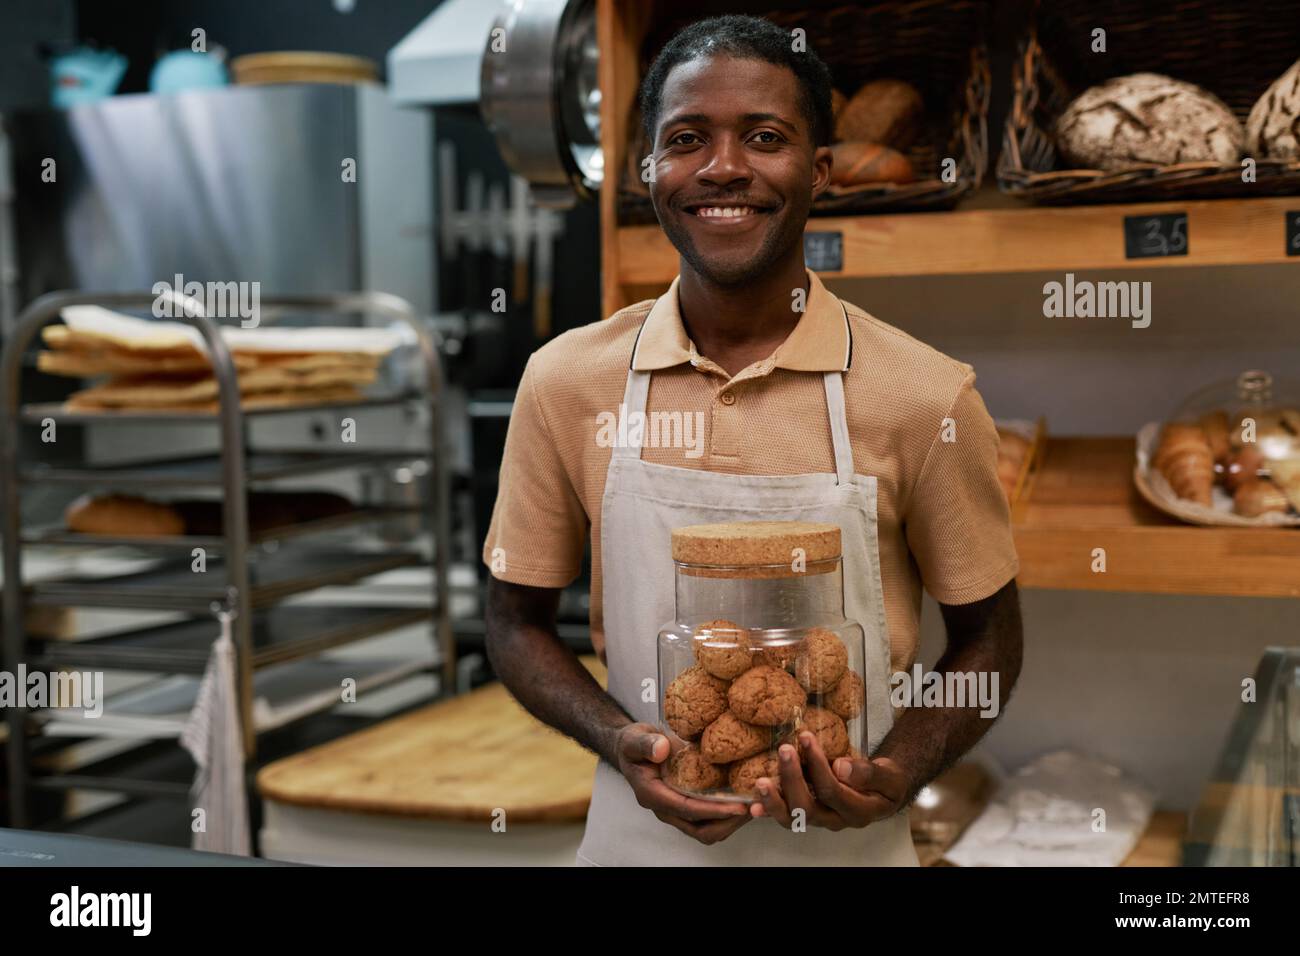 Portrait of smiling bakery worker holding glass jar of oatmeal cookies Stock Photo